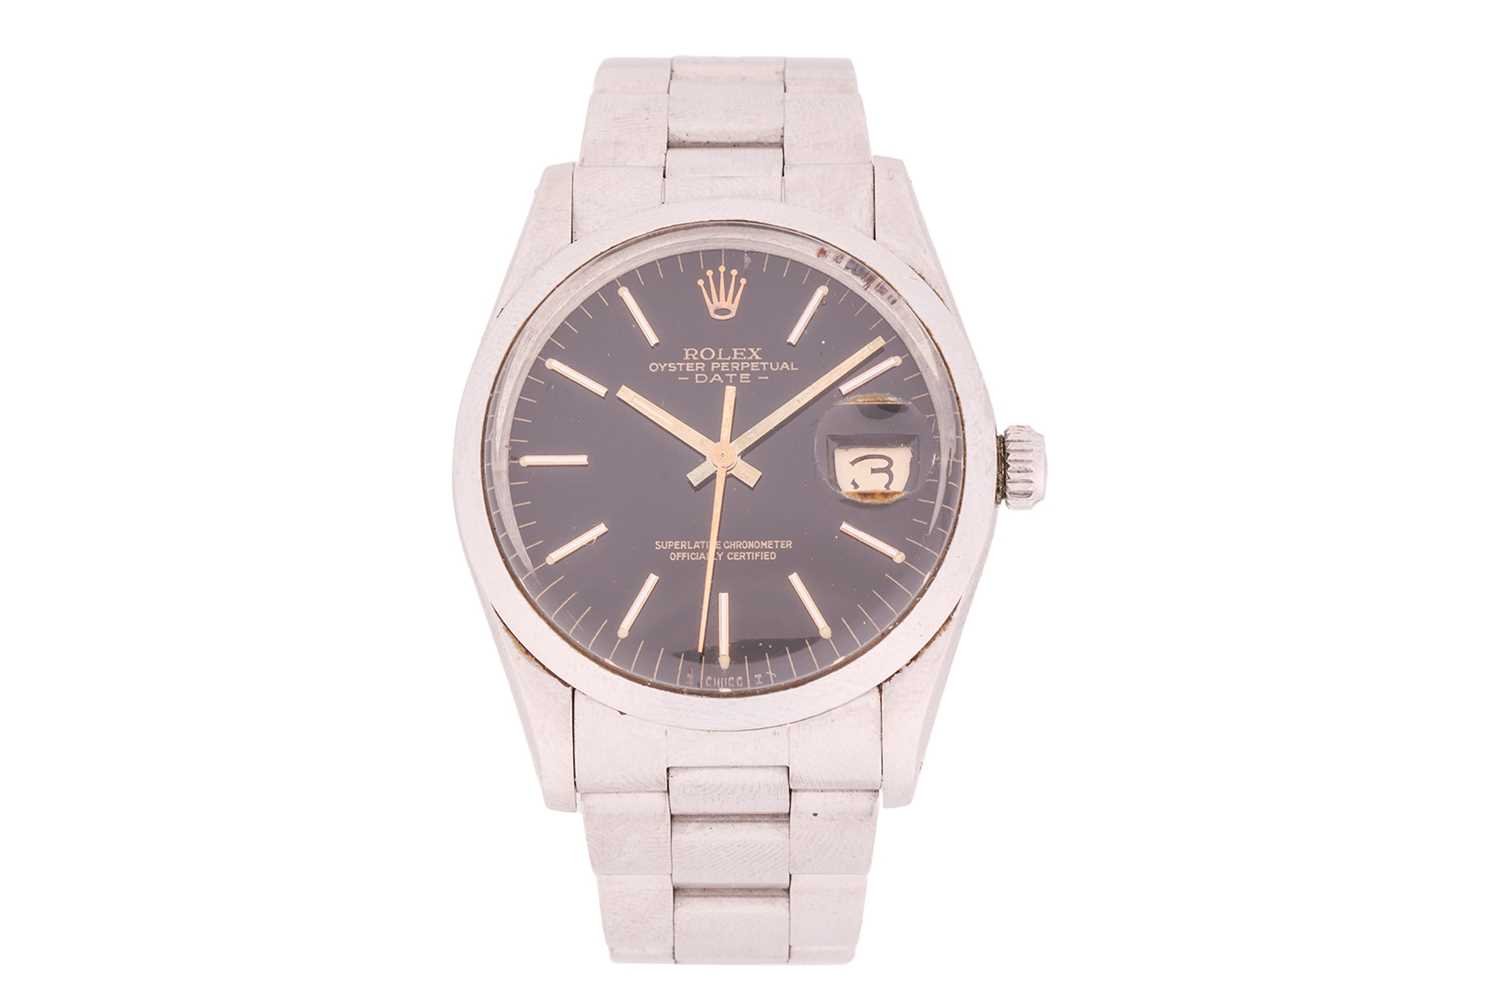 A Rolex Oyster Perpetual Date with black dial wristwatch Ref: 15000 Model: 15000 Serial: 7157952 Yea